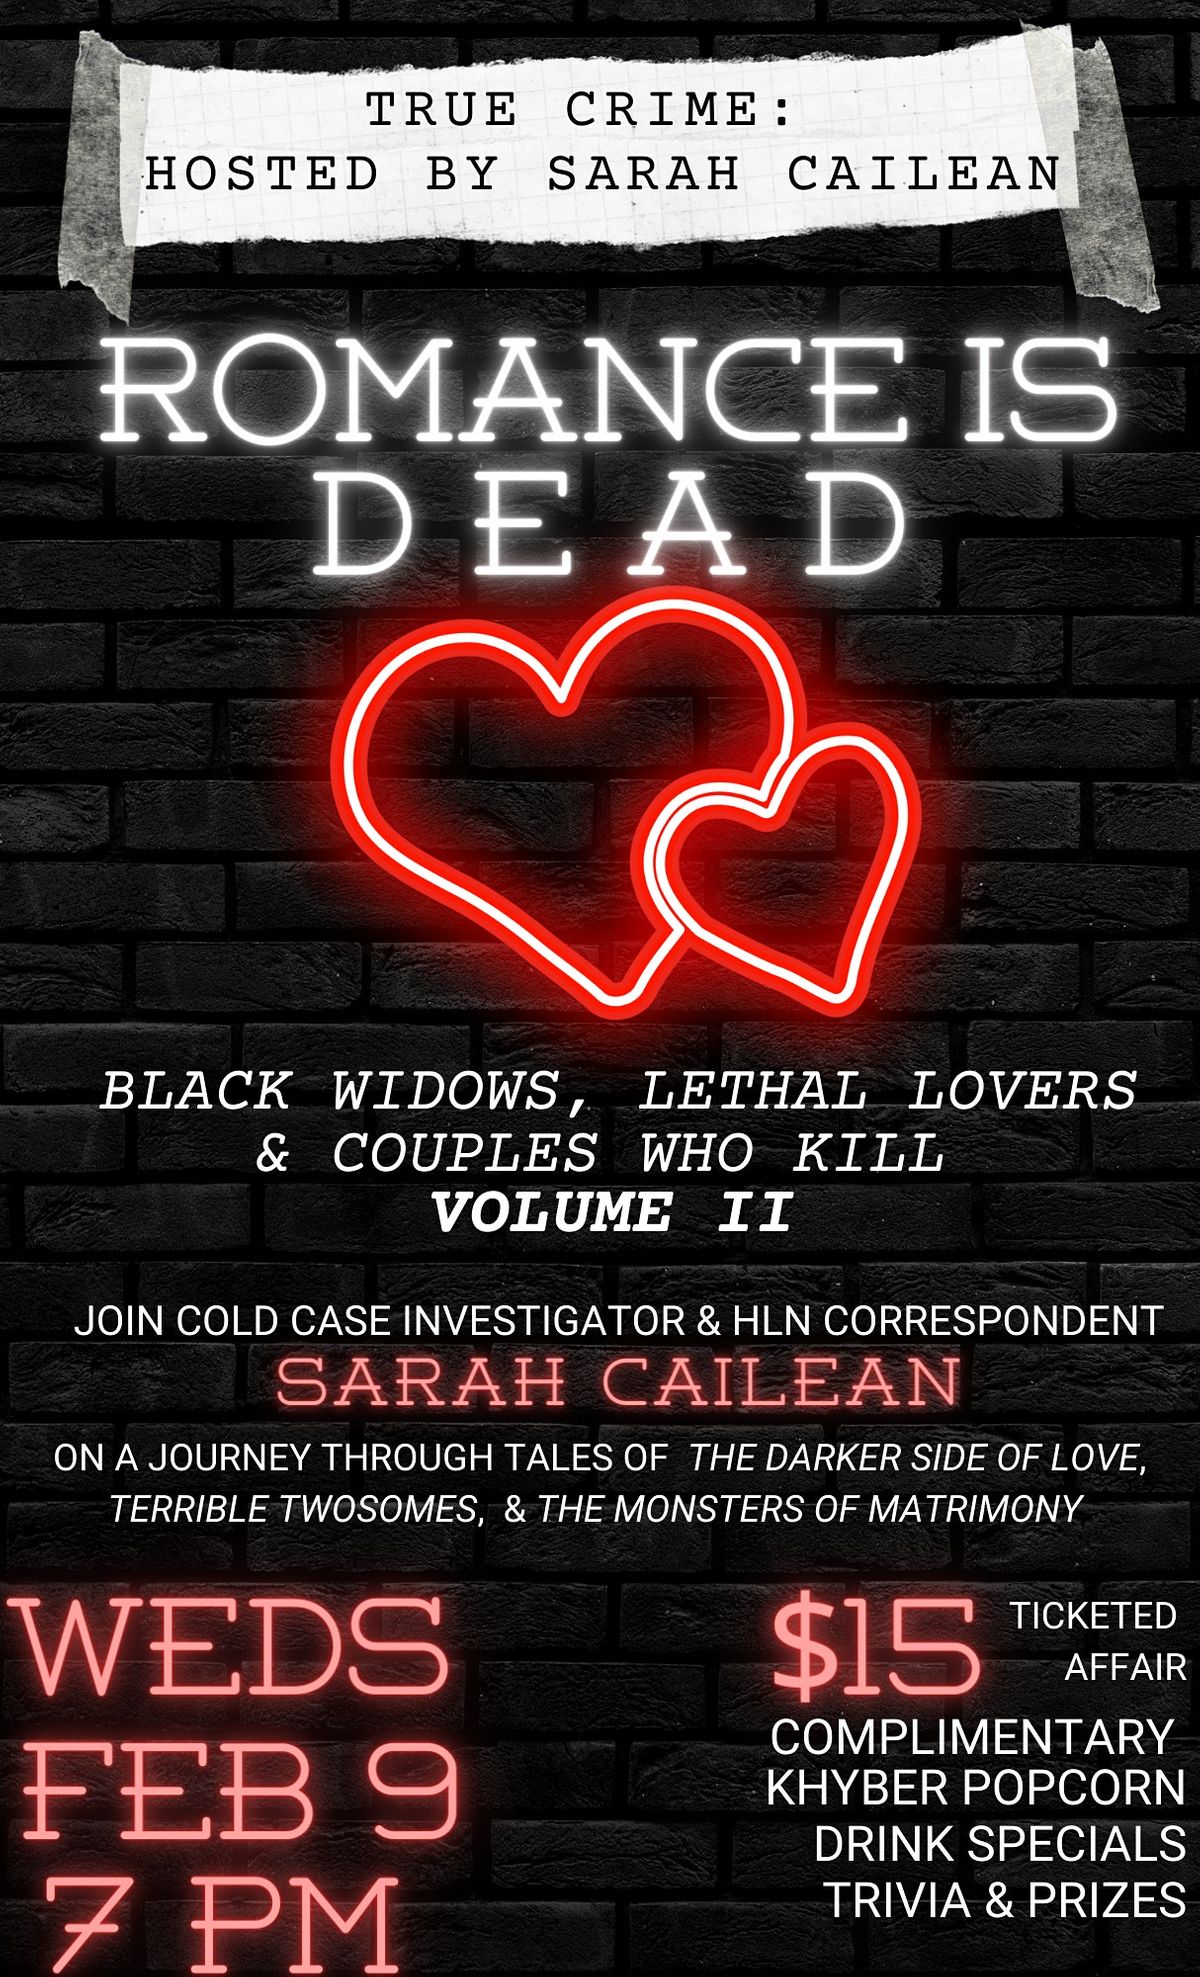 TRUE CRIME: ROMANCE IS DEAD hosted by Sarah Cailean